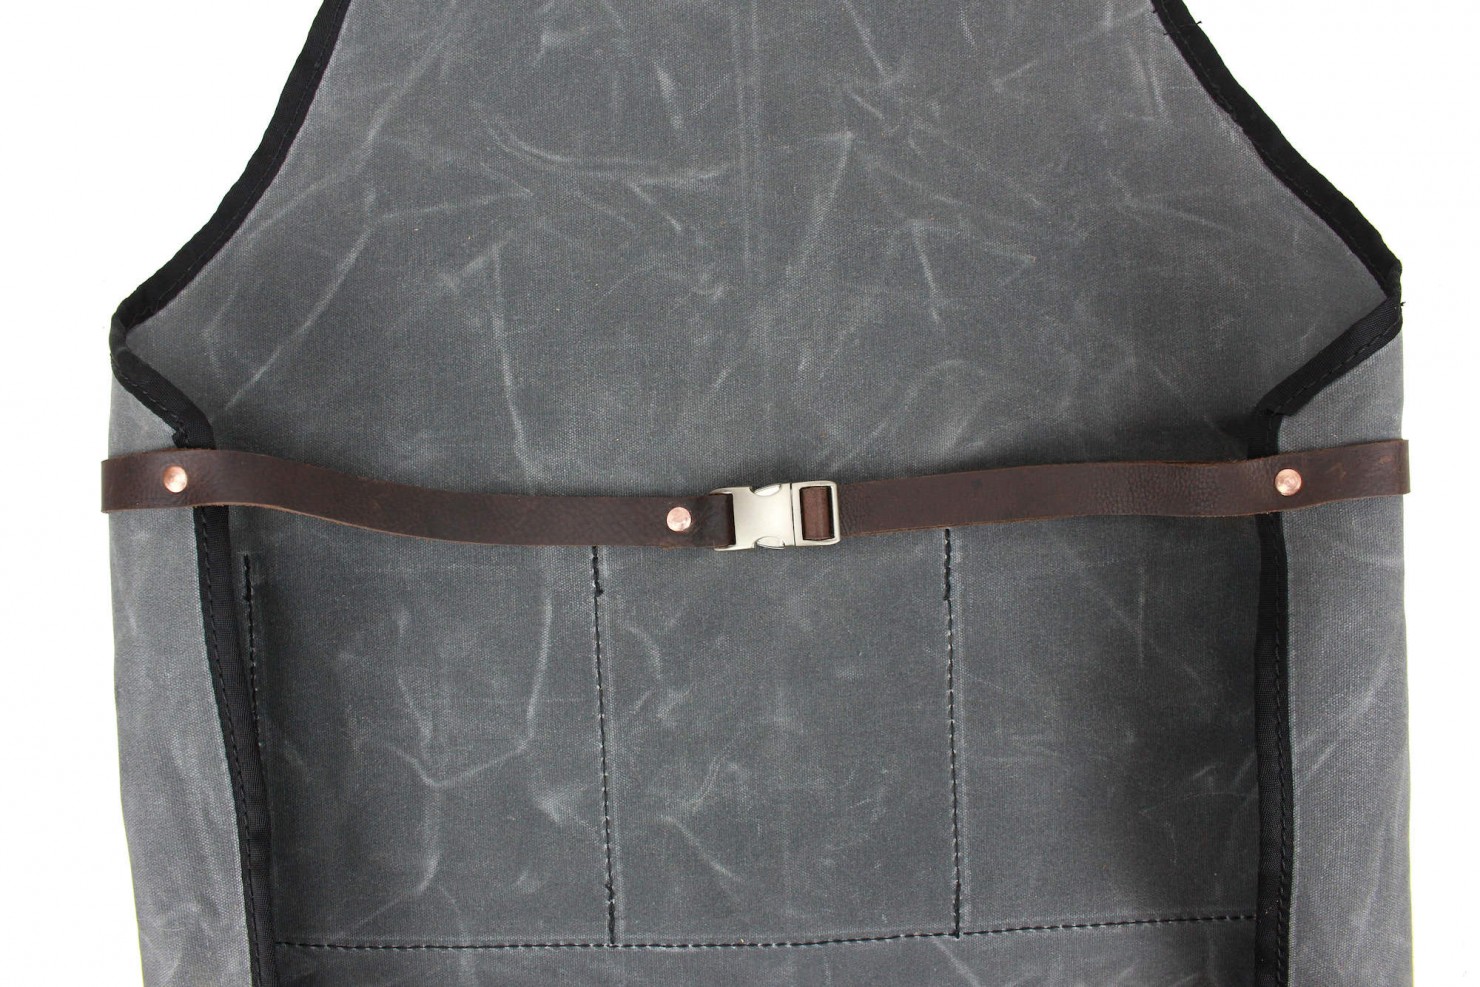 Gentleman's Apron by Rugged Material